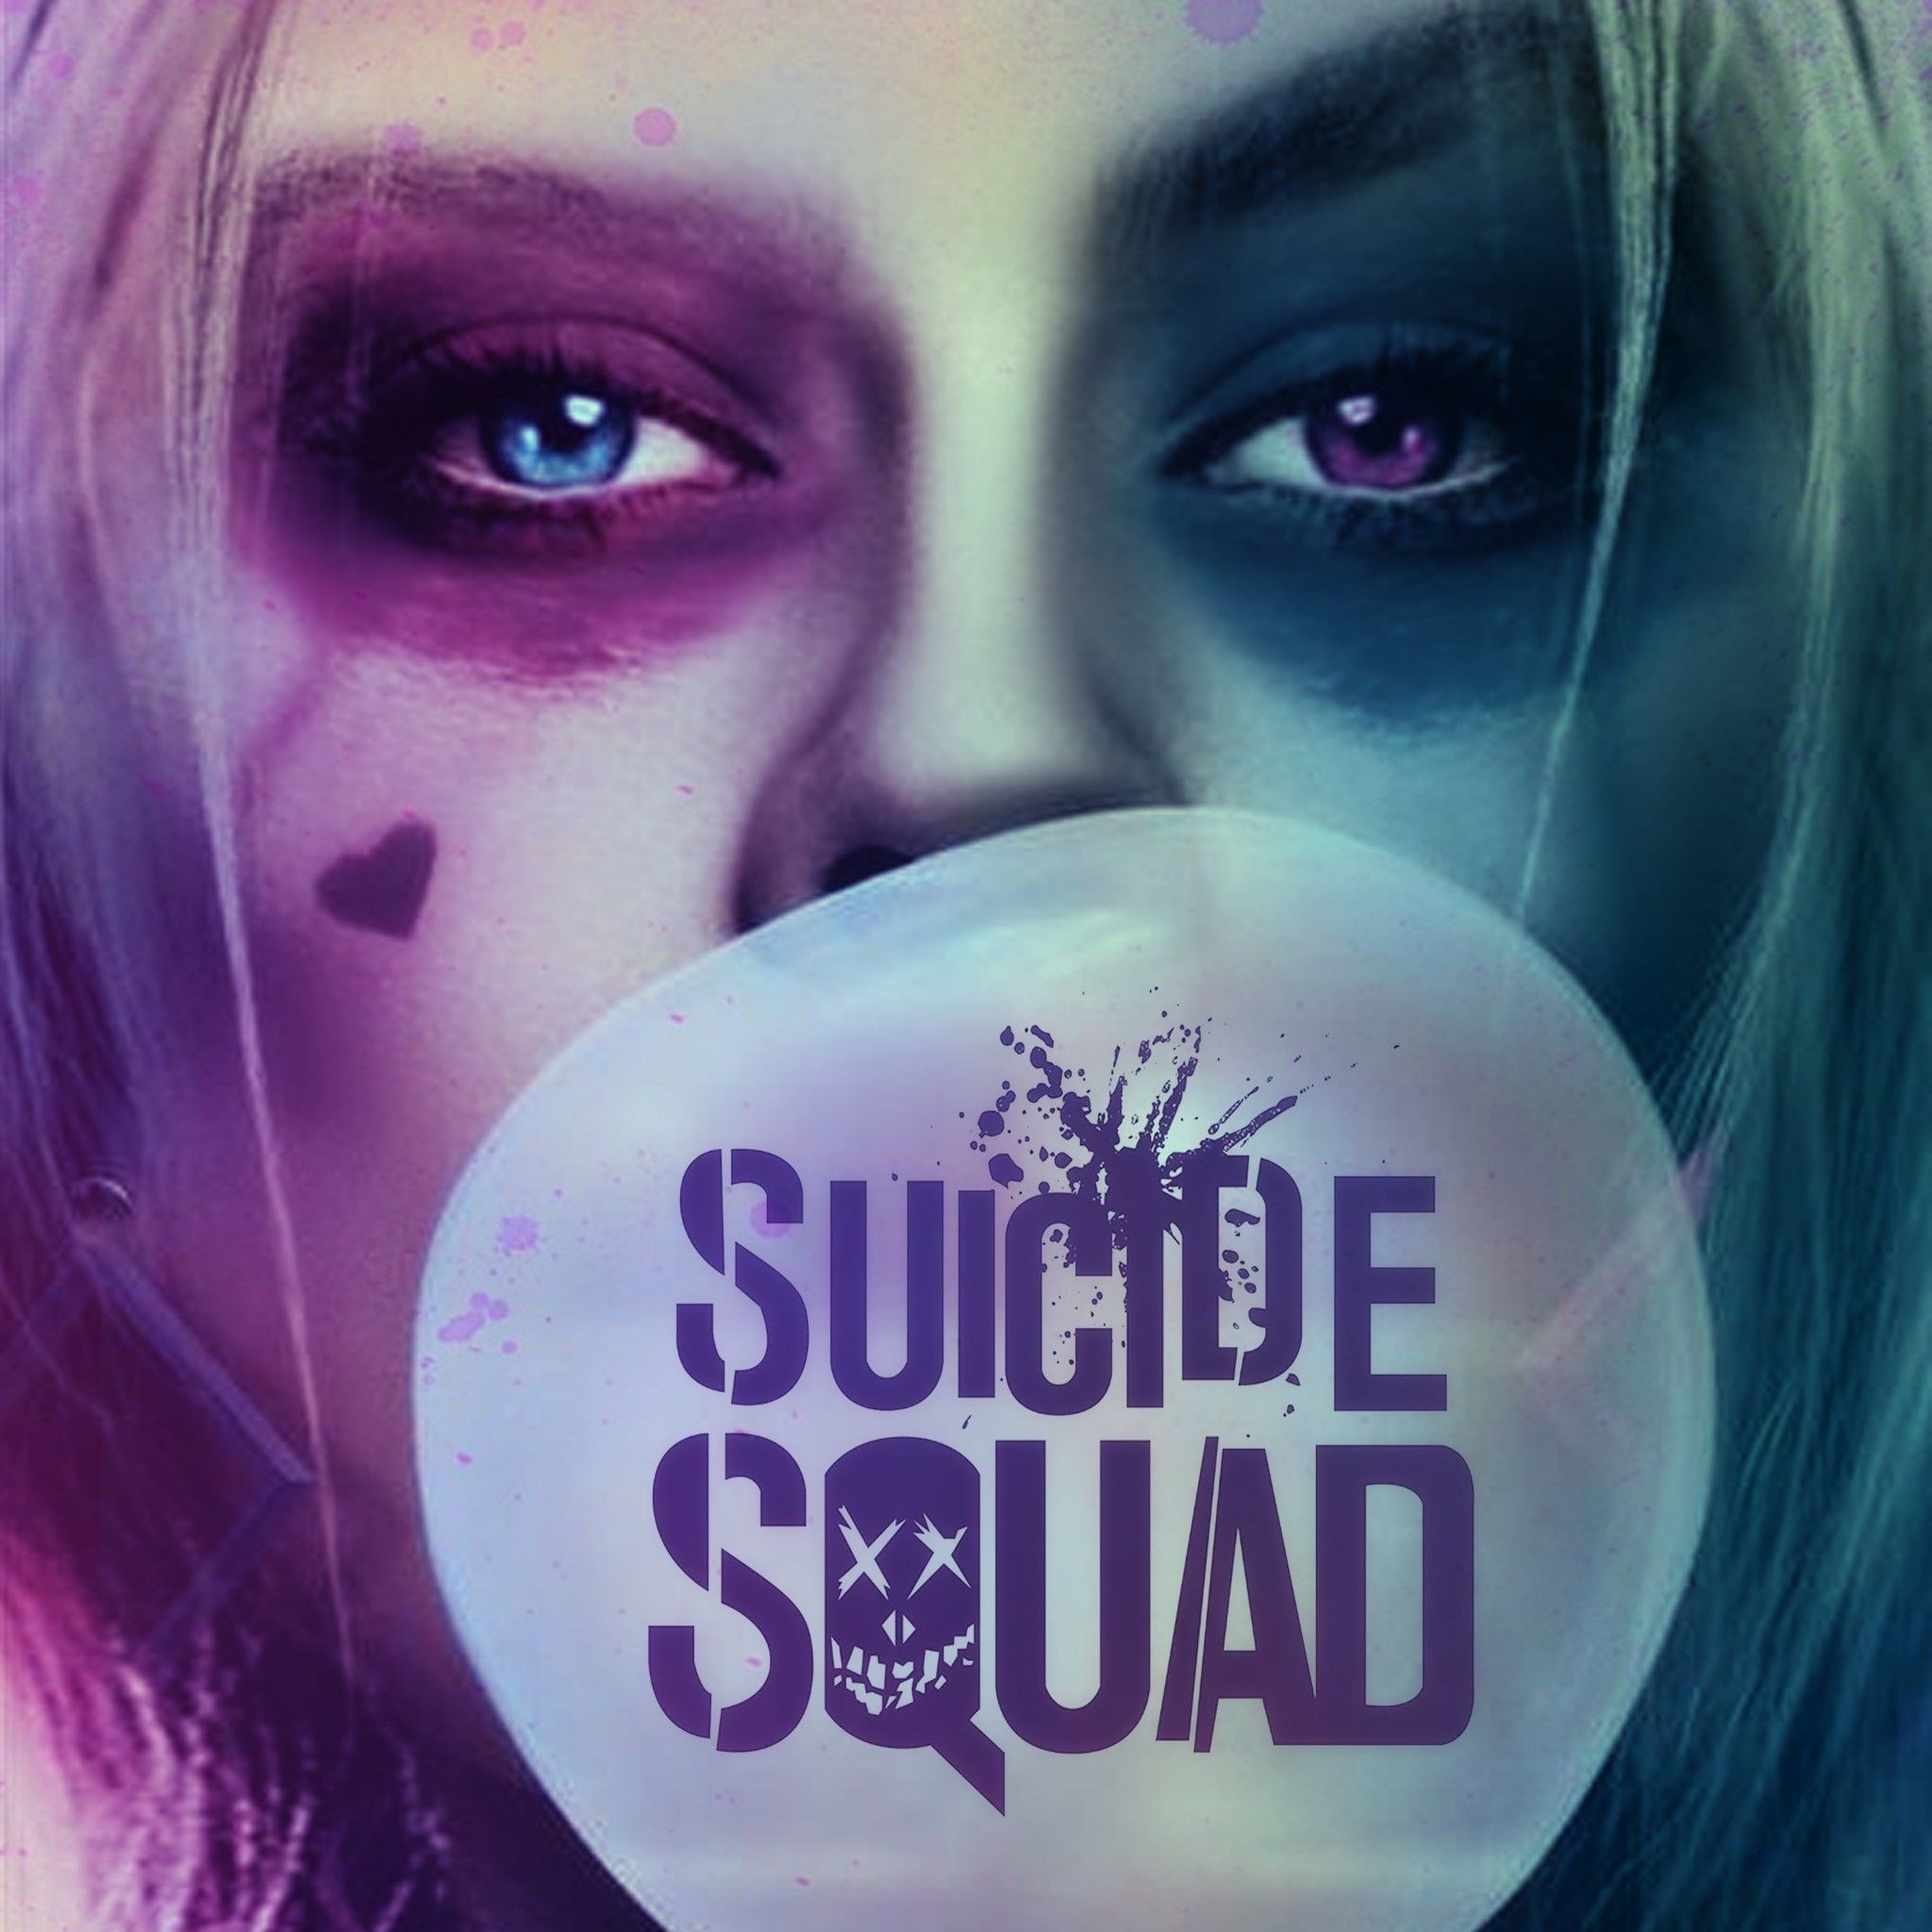 2048x2048 1600x2316 Description Fun Art Joker Harley Quinn Suicide Squad wallpaper  from Movies category. You are on page with Fun Art Joker Harley Quinn Suicide  Squad ...